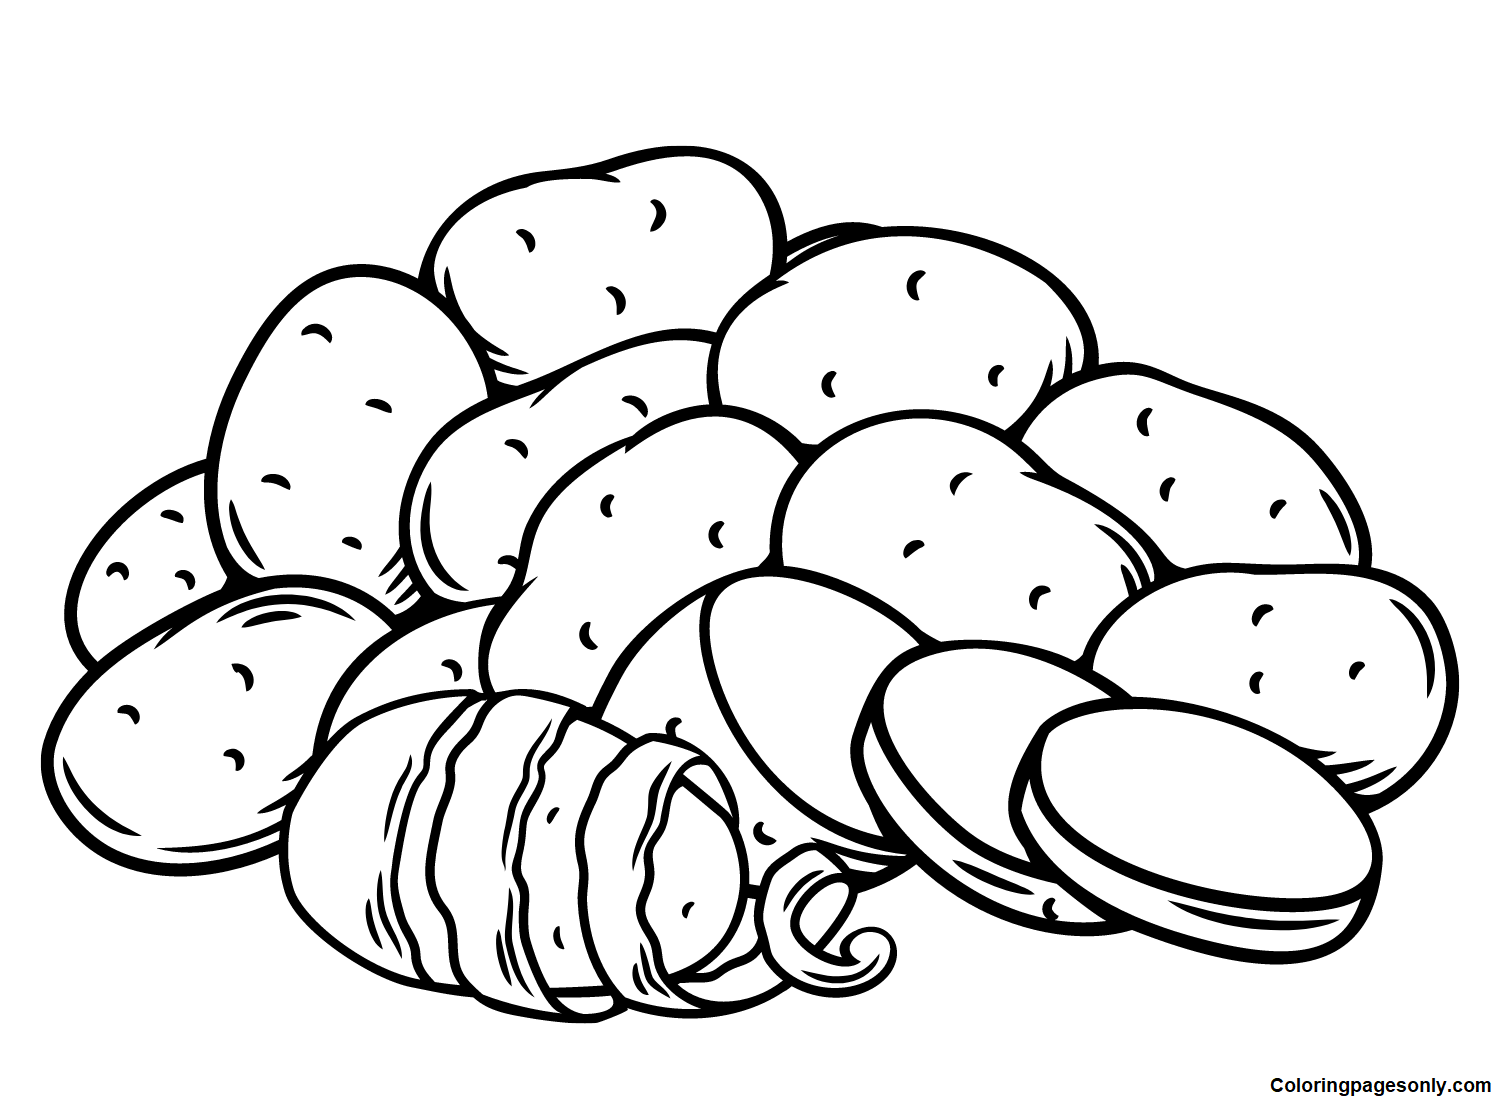 Vegetable Potatoes Coloring Pages